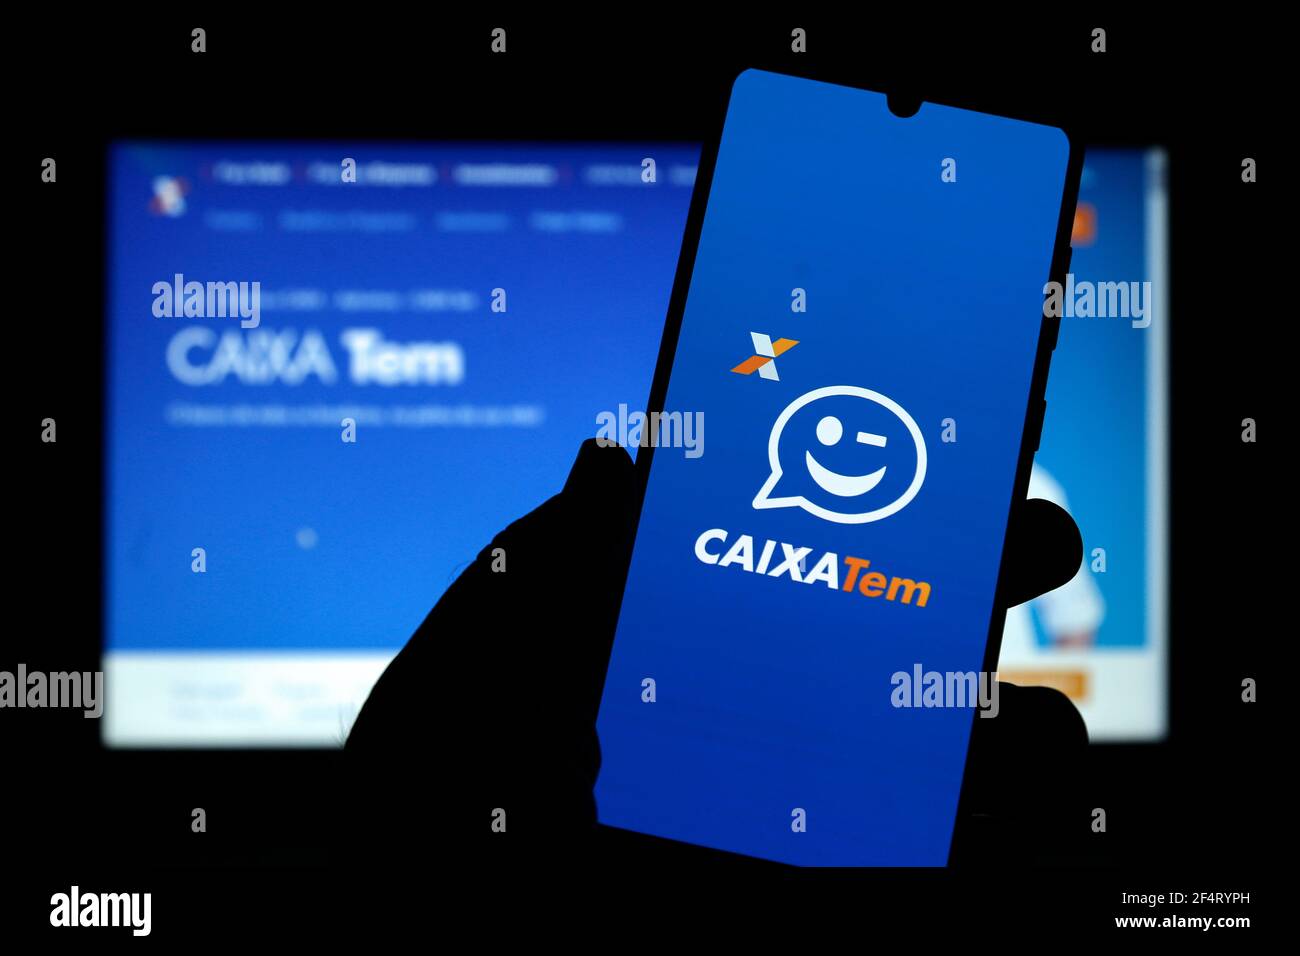 Minas Gerais, Brazil - March 21, 2021: client used the Caixa Tem application on a mobile phone Stock Photo